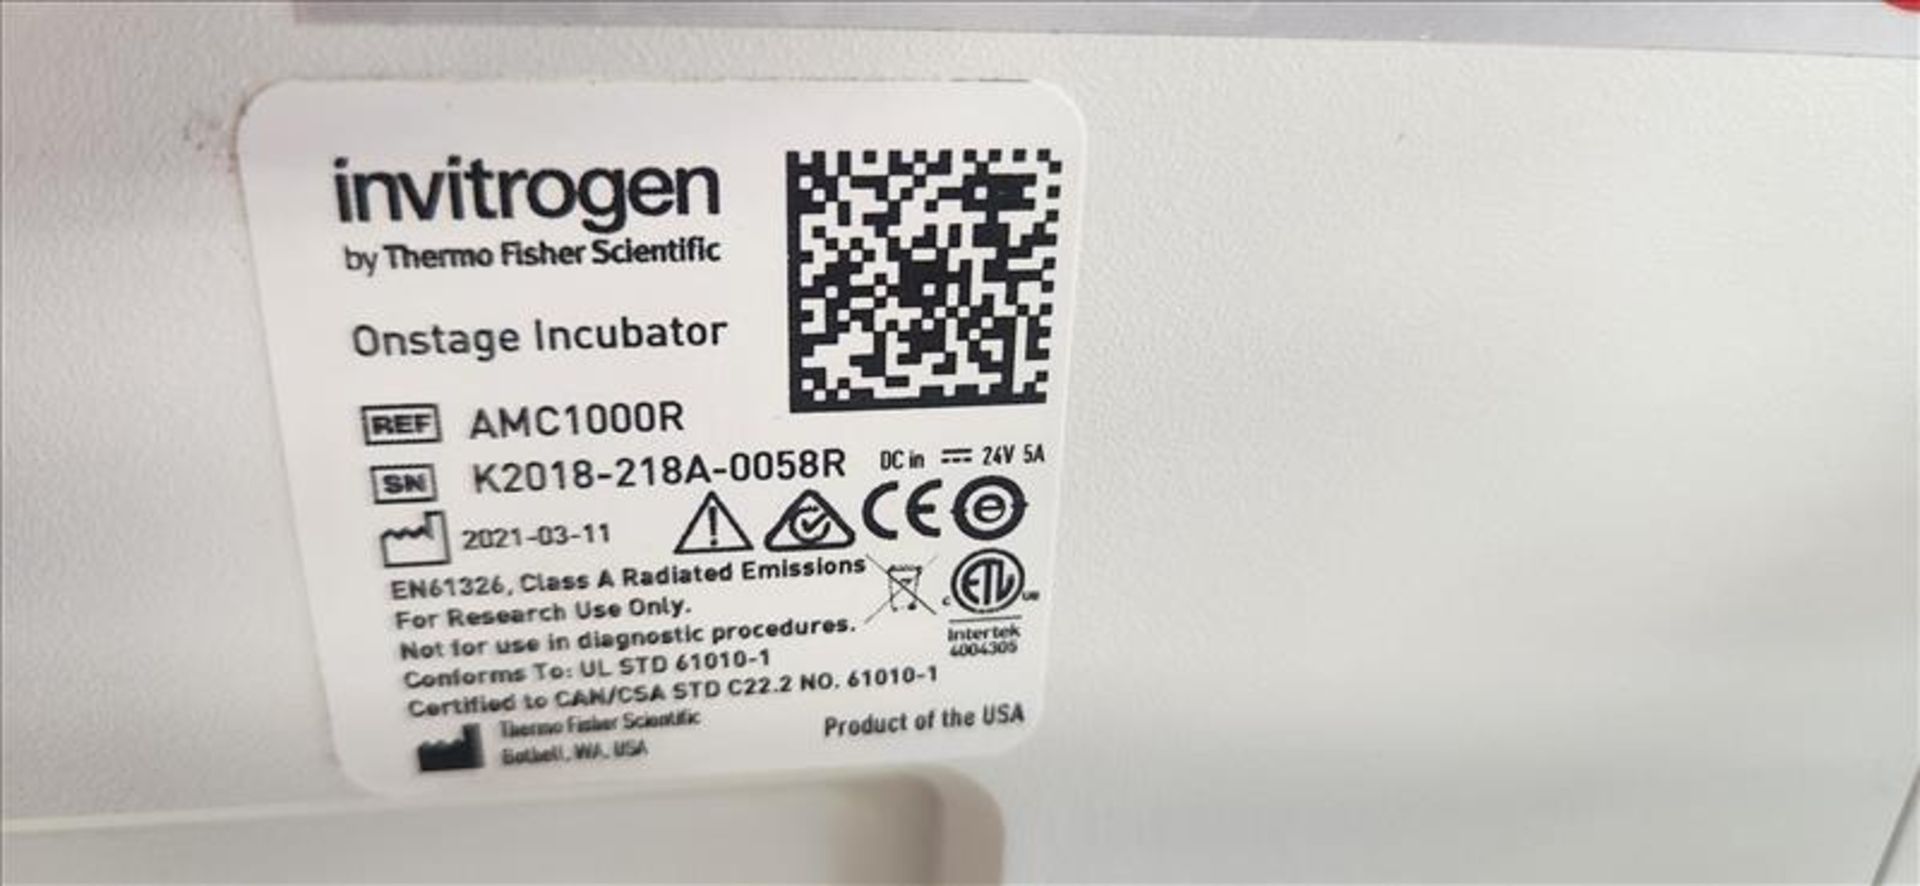 Thermo Fisher Invitrogen Vital EQP-540 Onstage Incubator, S/N K2018-218A-0058R - Image 4 of 4